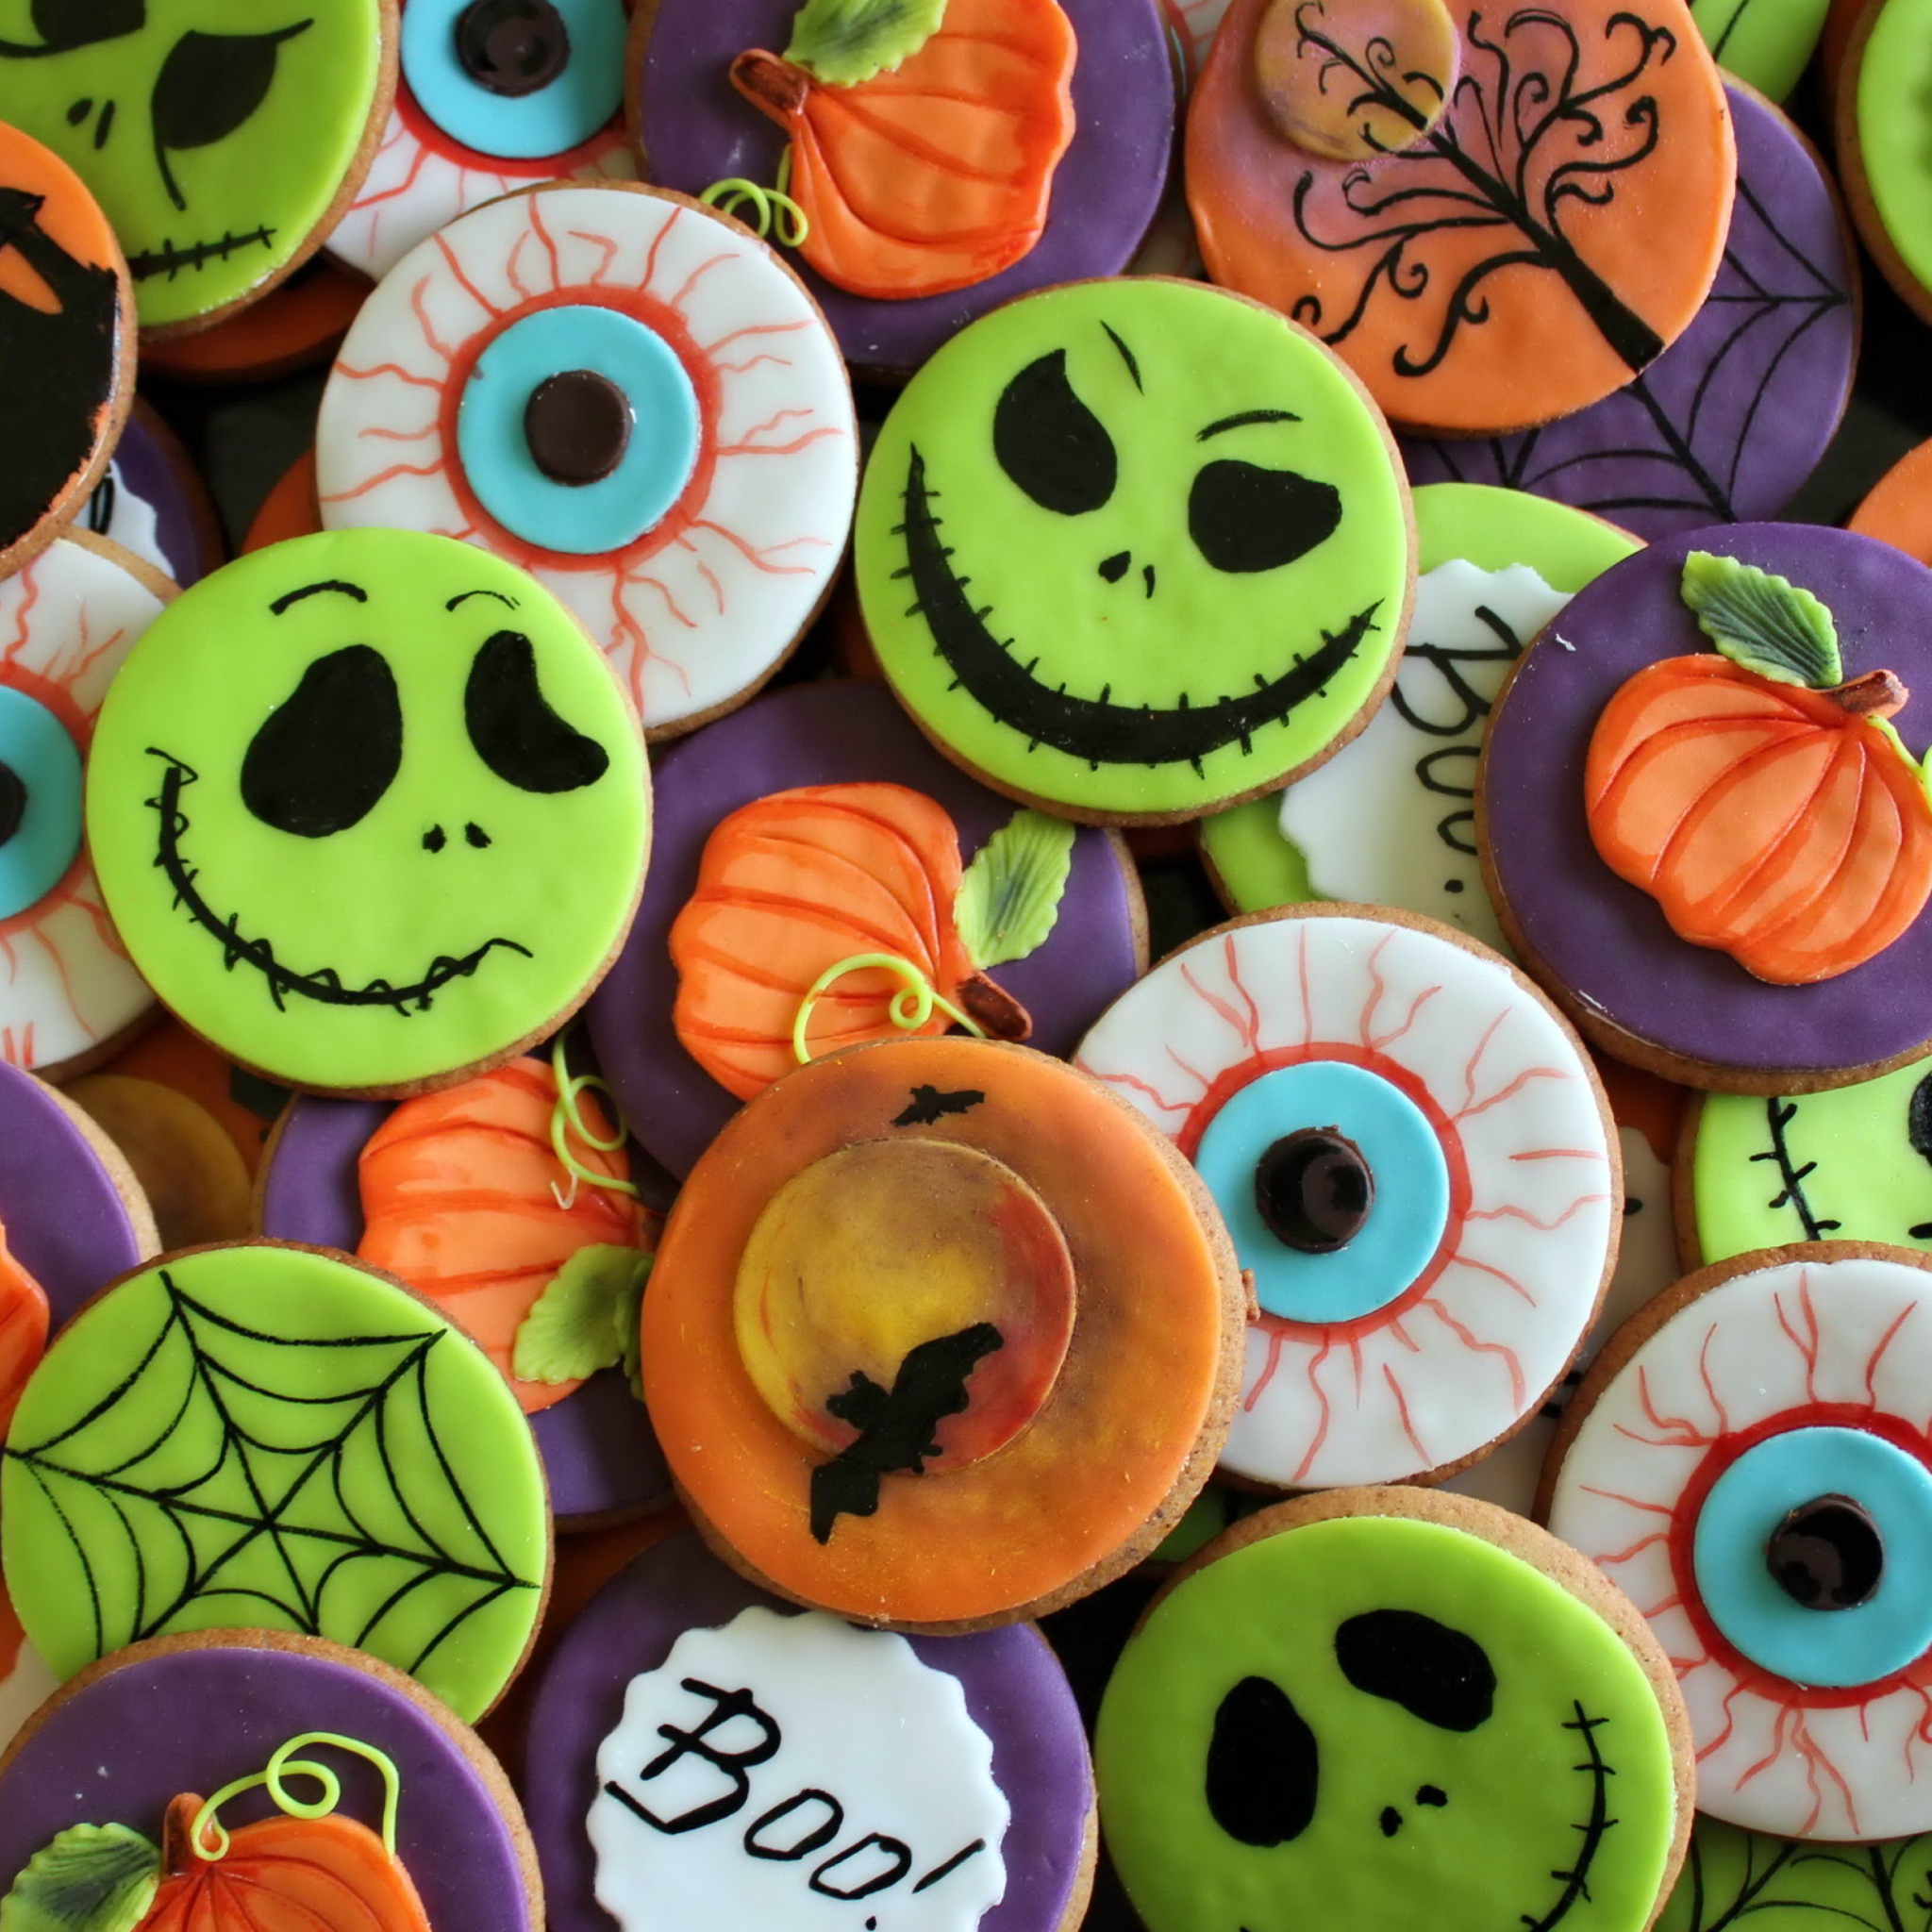 Scary Cookies wallpaper 2048x2048